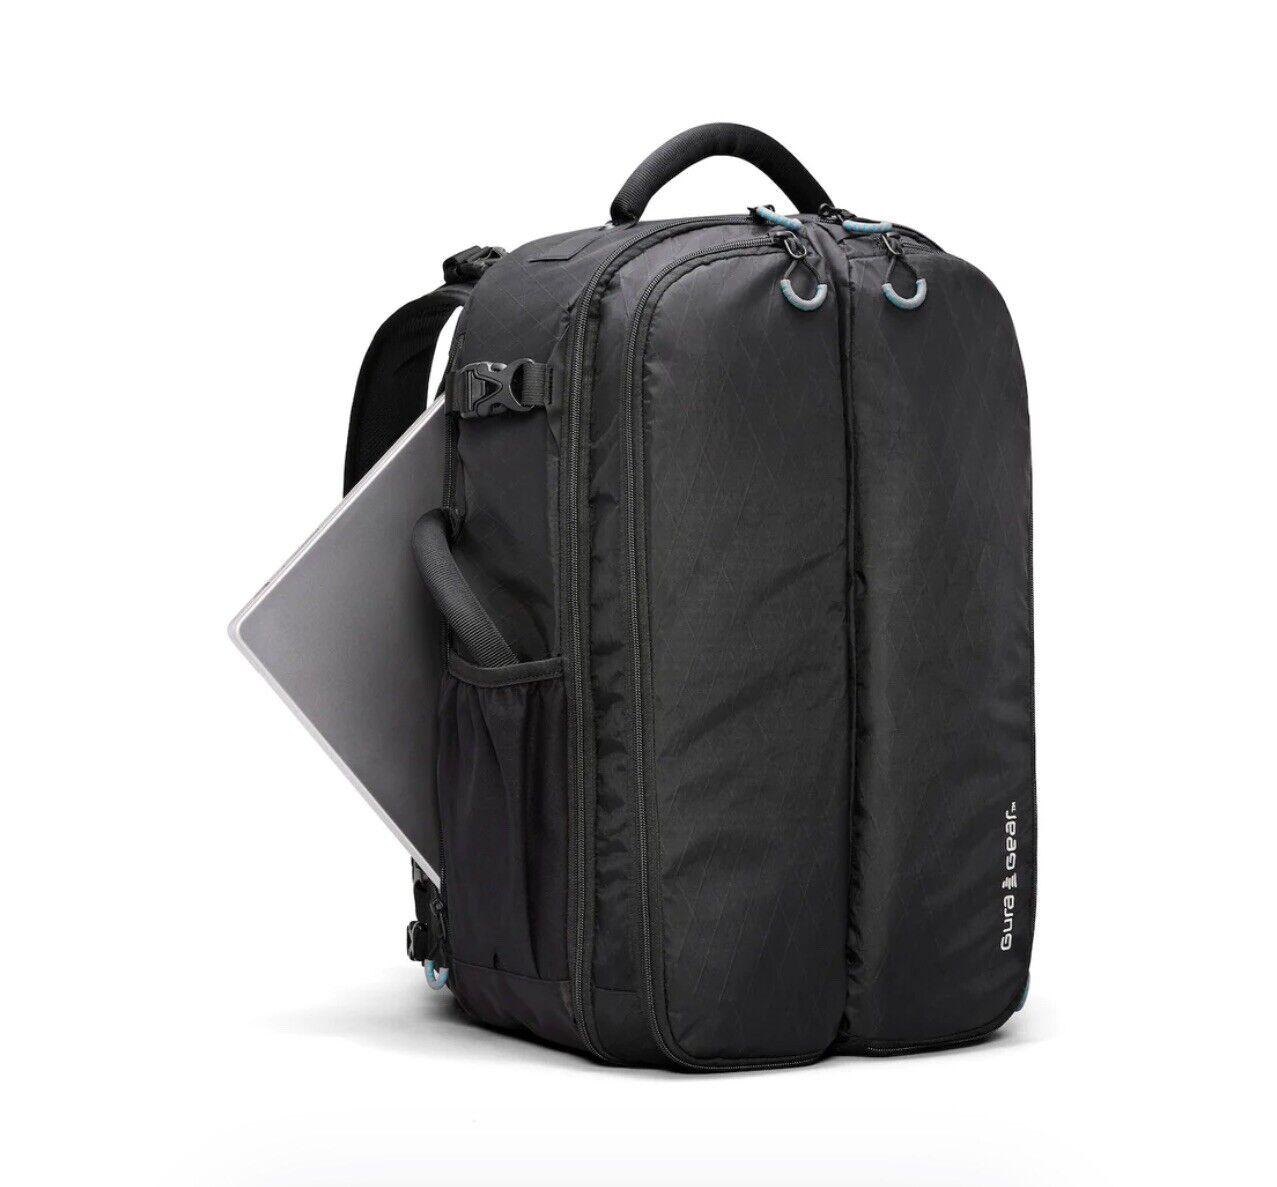 Gura Gear Kiboko 30L+ Camera Backpack with Laptop (Fast shipping)